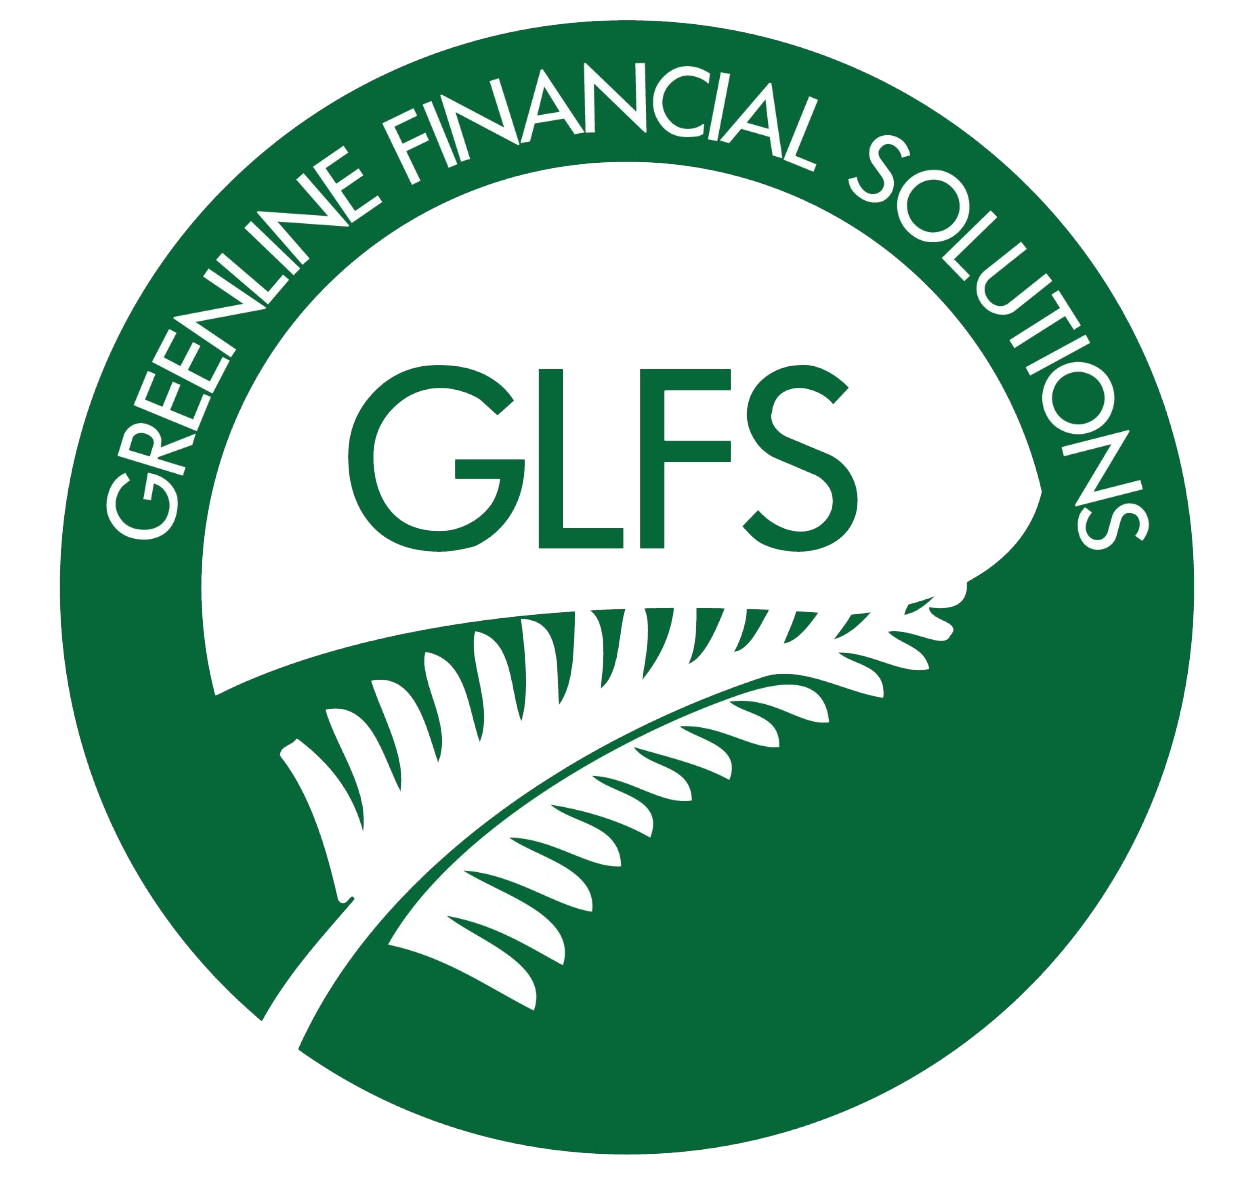 Greenline financial solutions